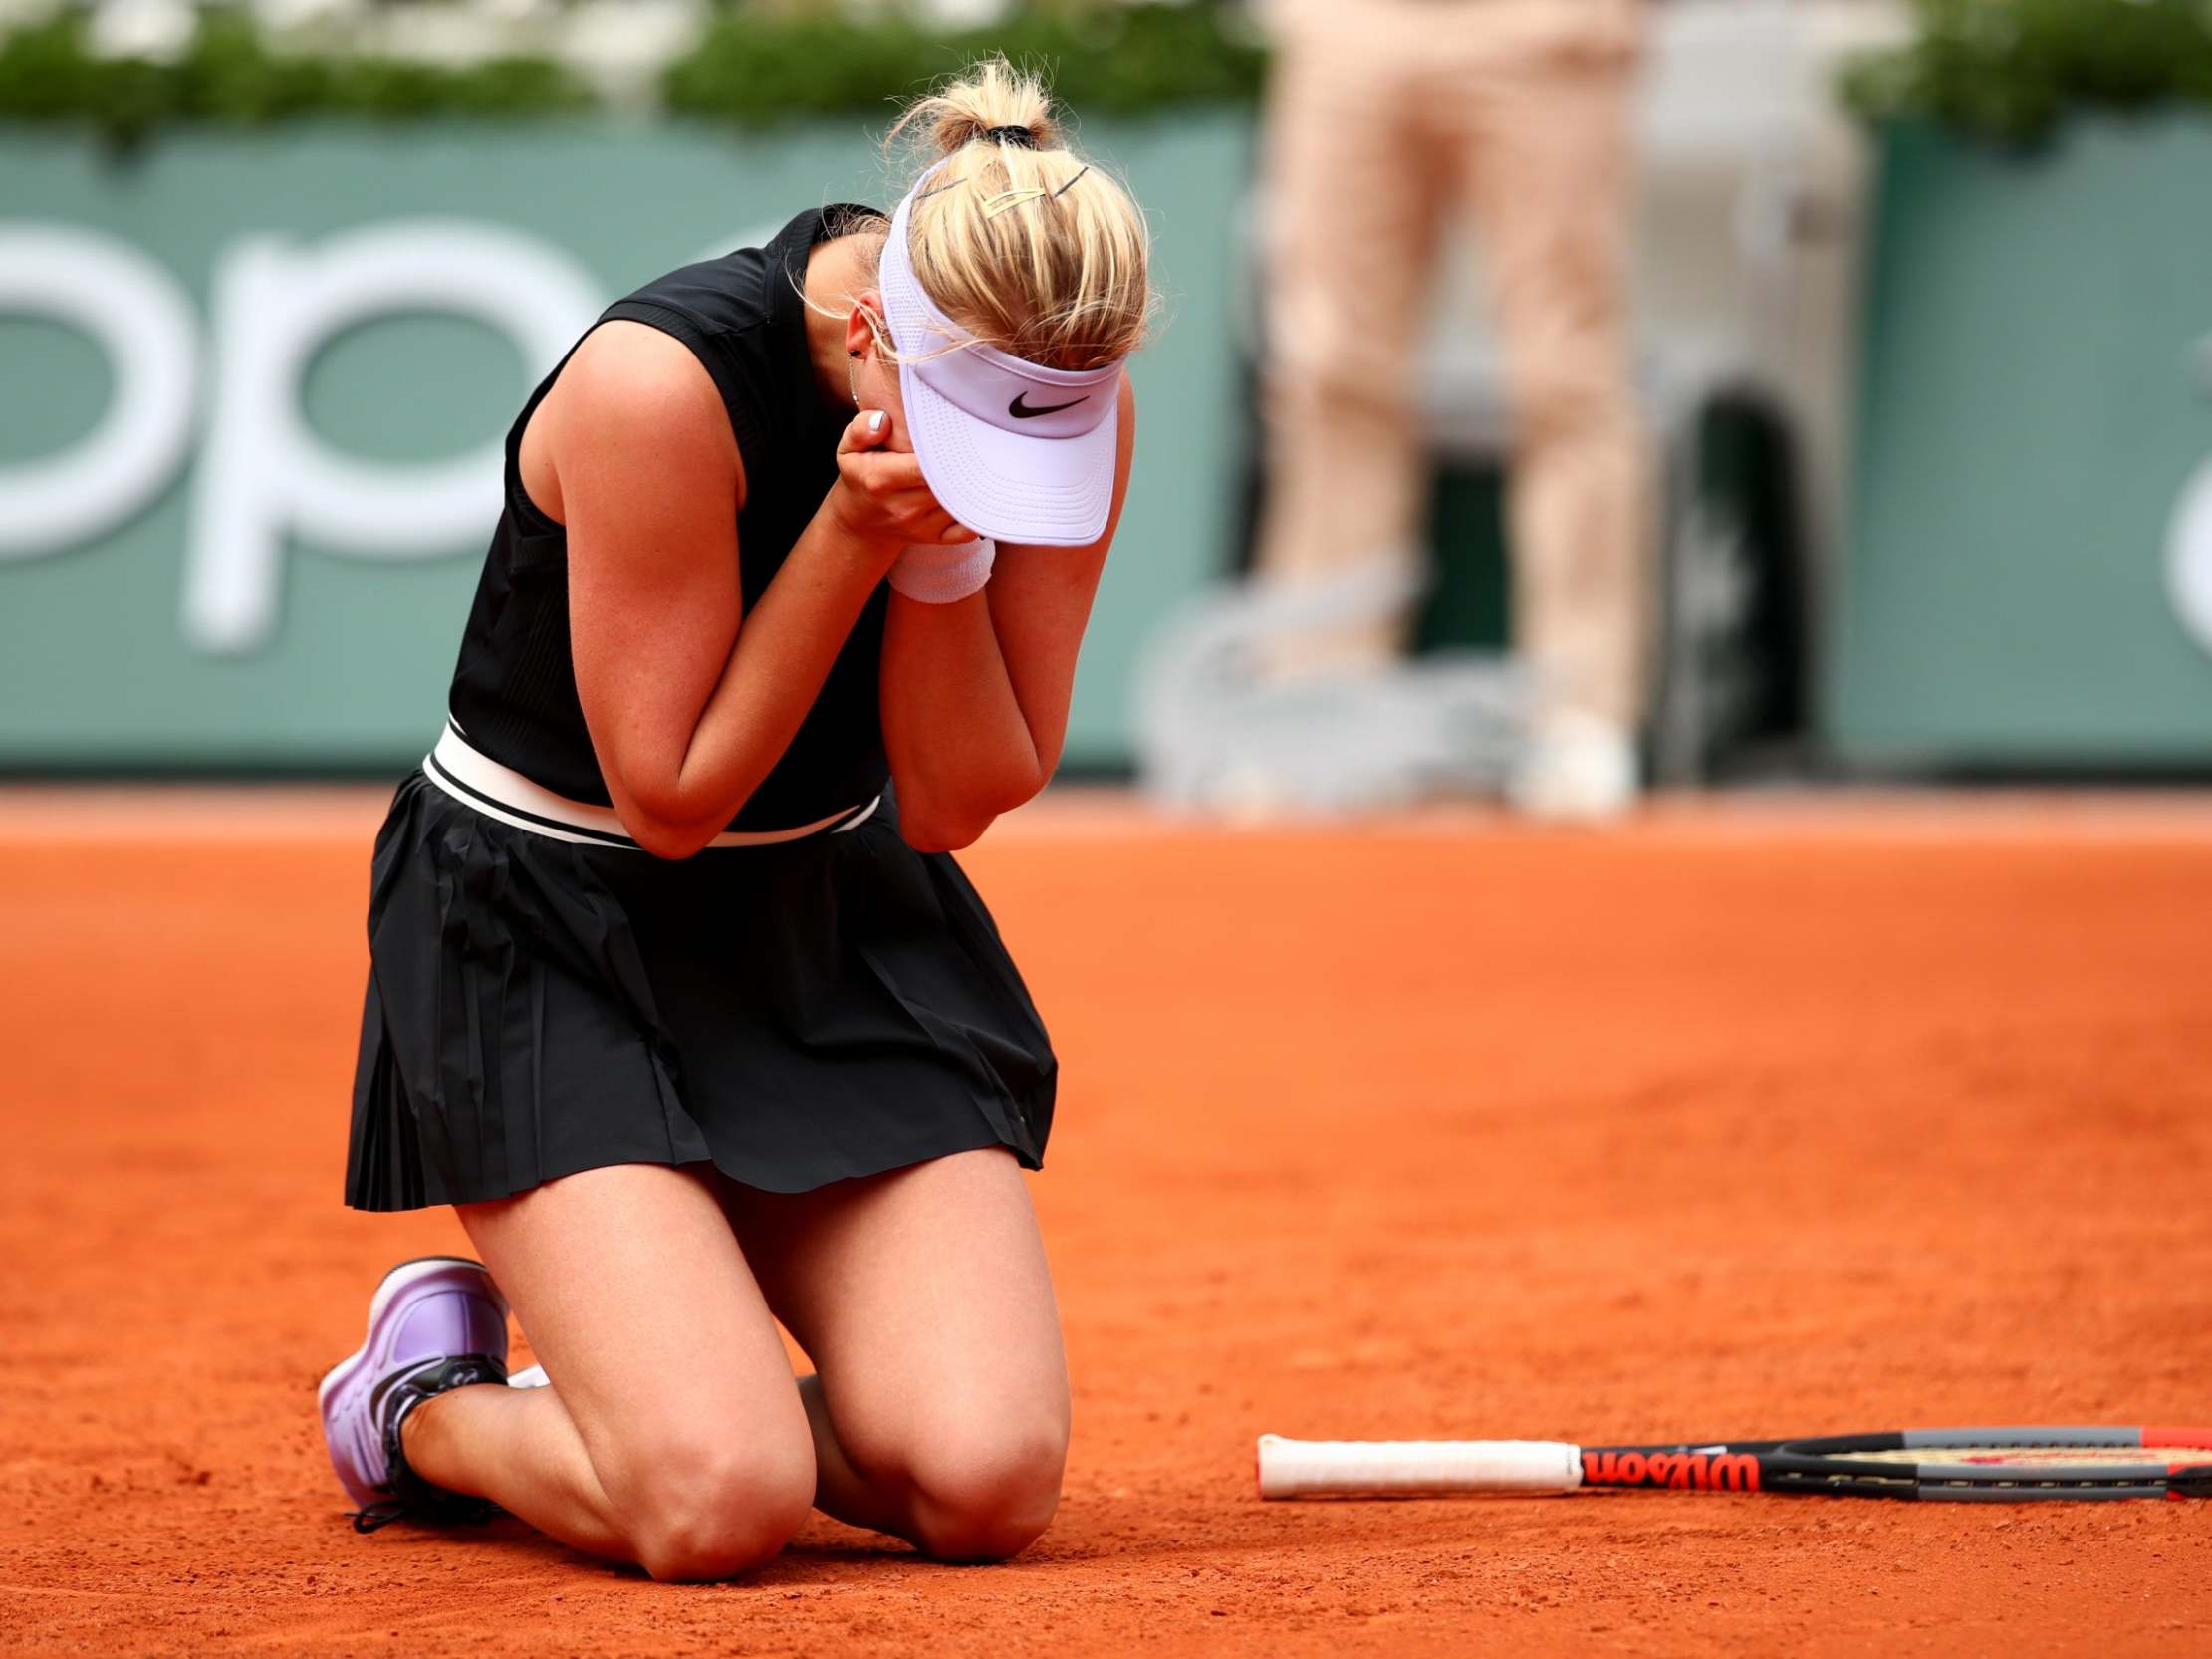 French Open 2019 Thursday S Order Of Play And Schedule Including Images, Photos, Reviews